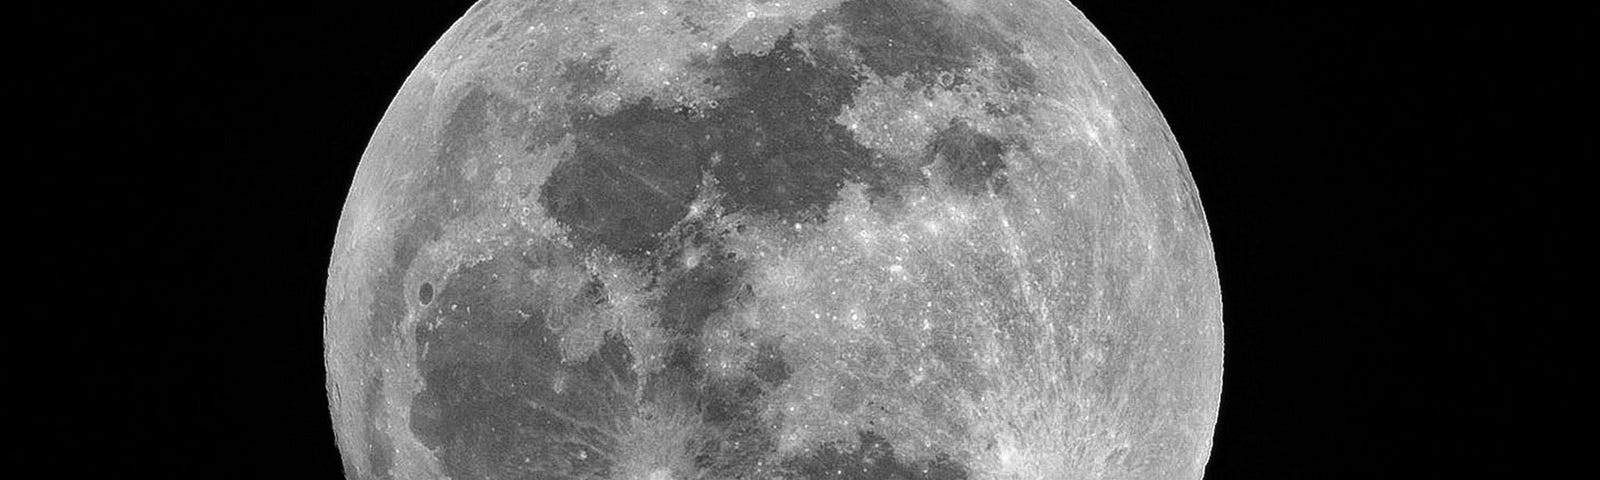 Surface of the moon.